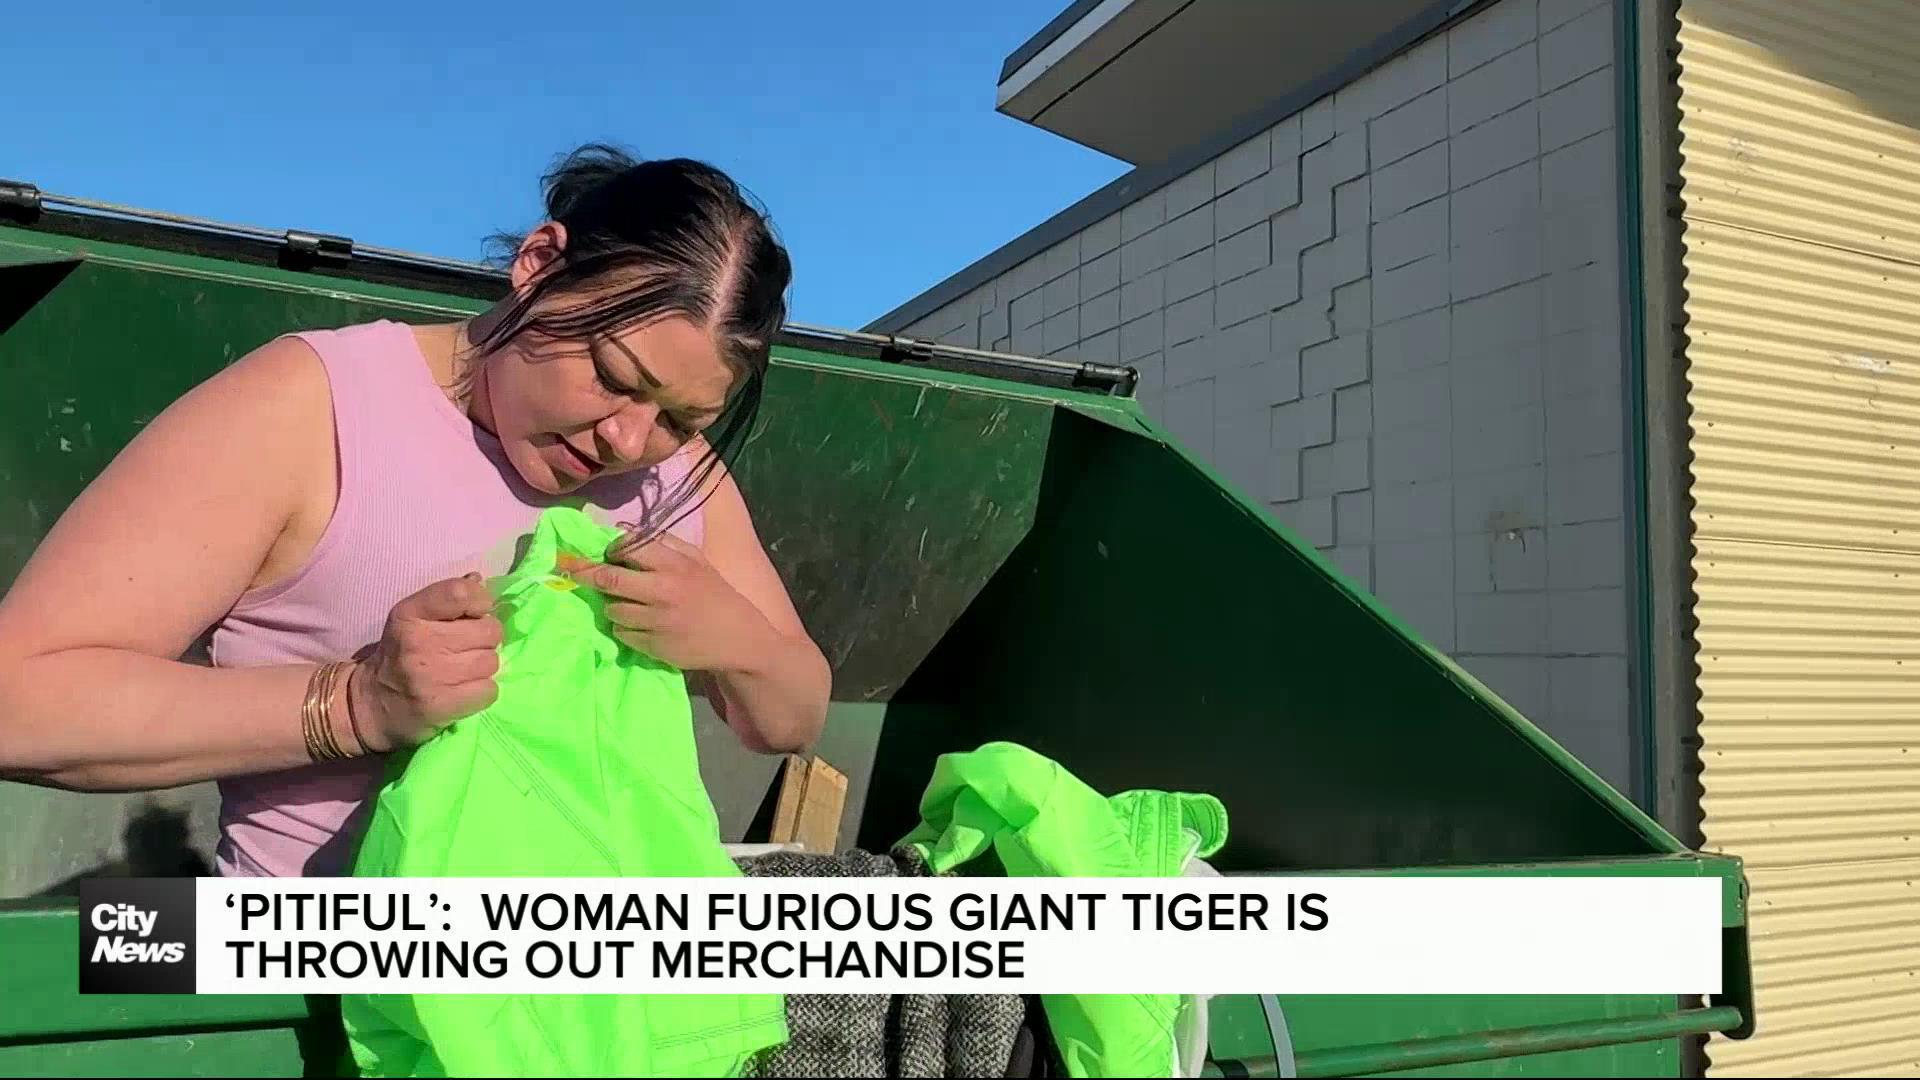 ‘Pitiful’ Winnipeg woman furious Giant Tiger tossing merchandise over donating